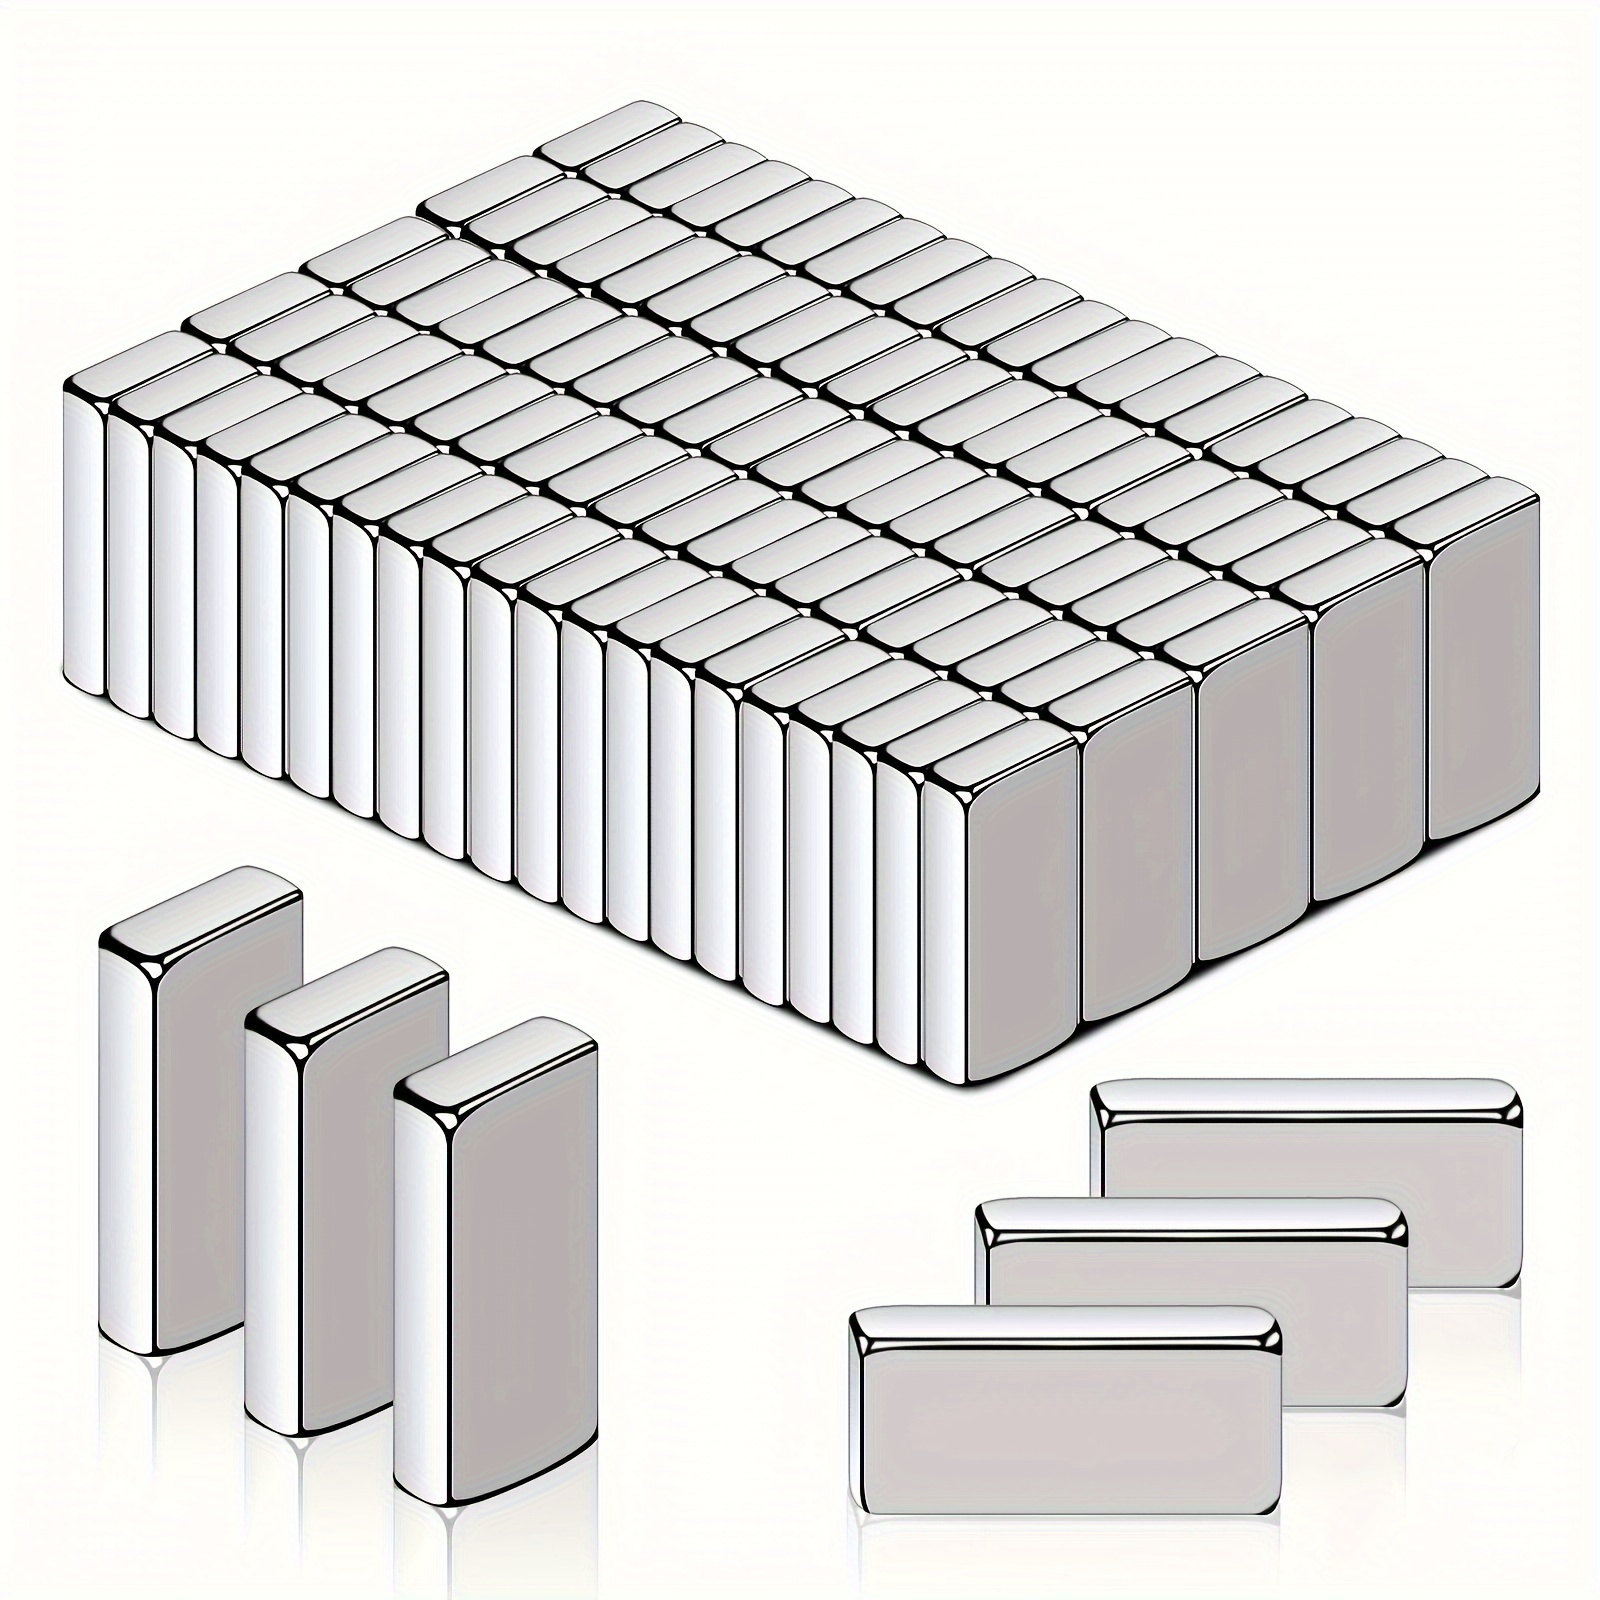 

100pcs Small Neodymium Magnets Bar, 10x5x2mm Strong Rare Earth Magnets Rectangular Neodymium Magnets Heavy Duty Magnets Tool For Storage, Whiteboard